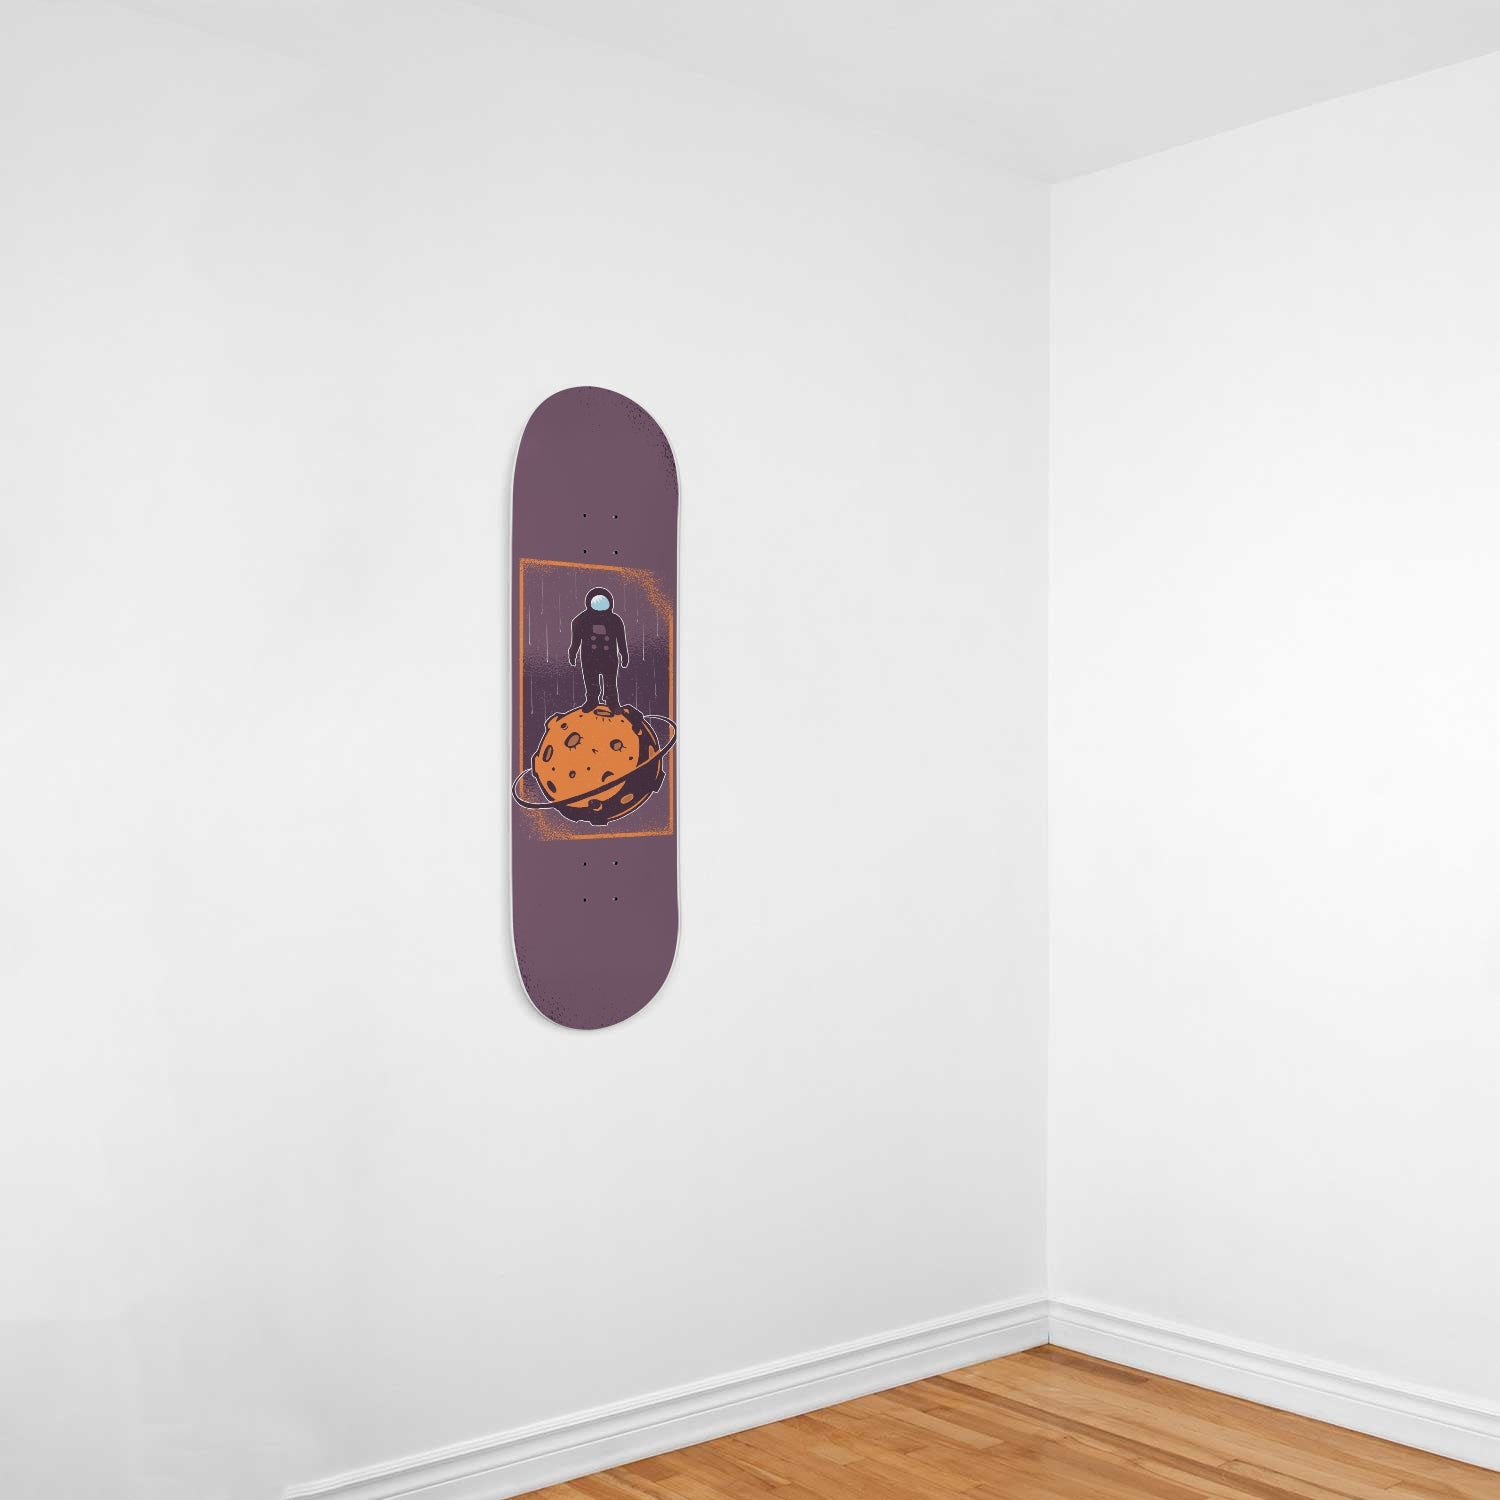 Space Odyssey #11.0.1 - Skater Wall